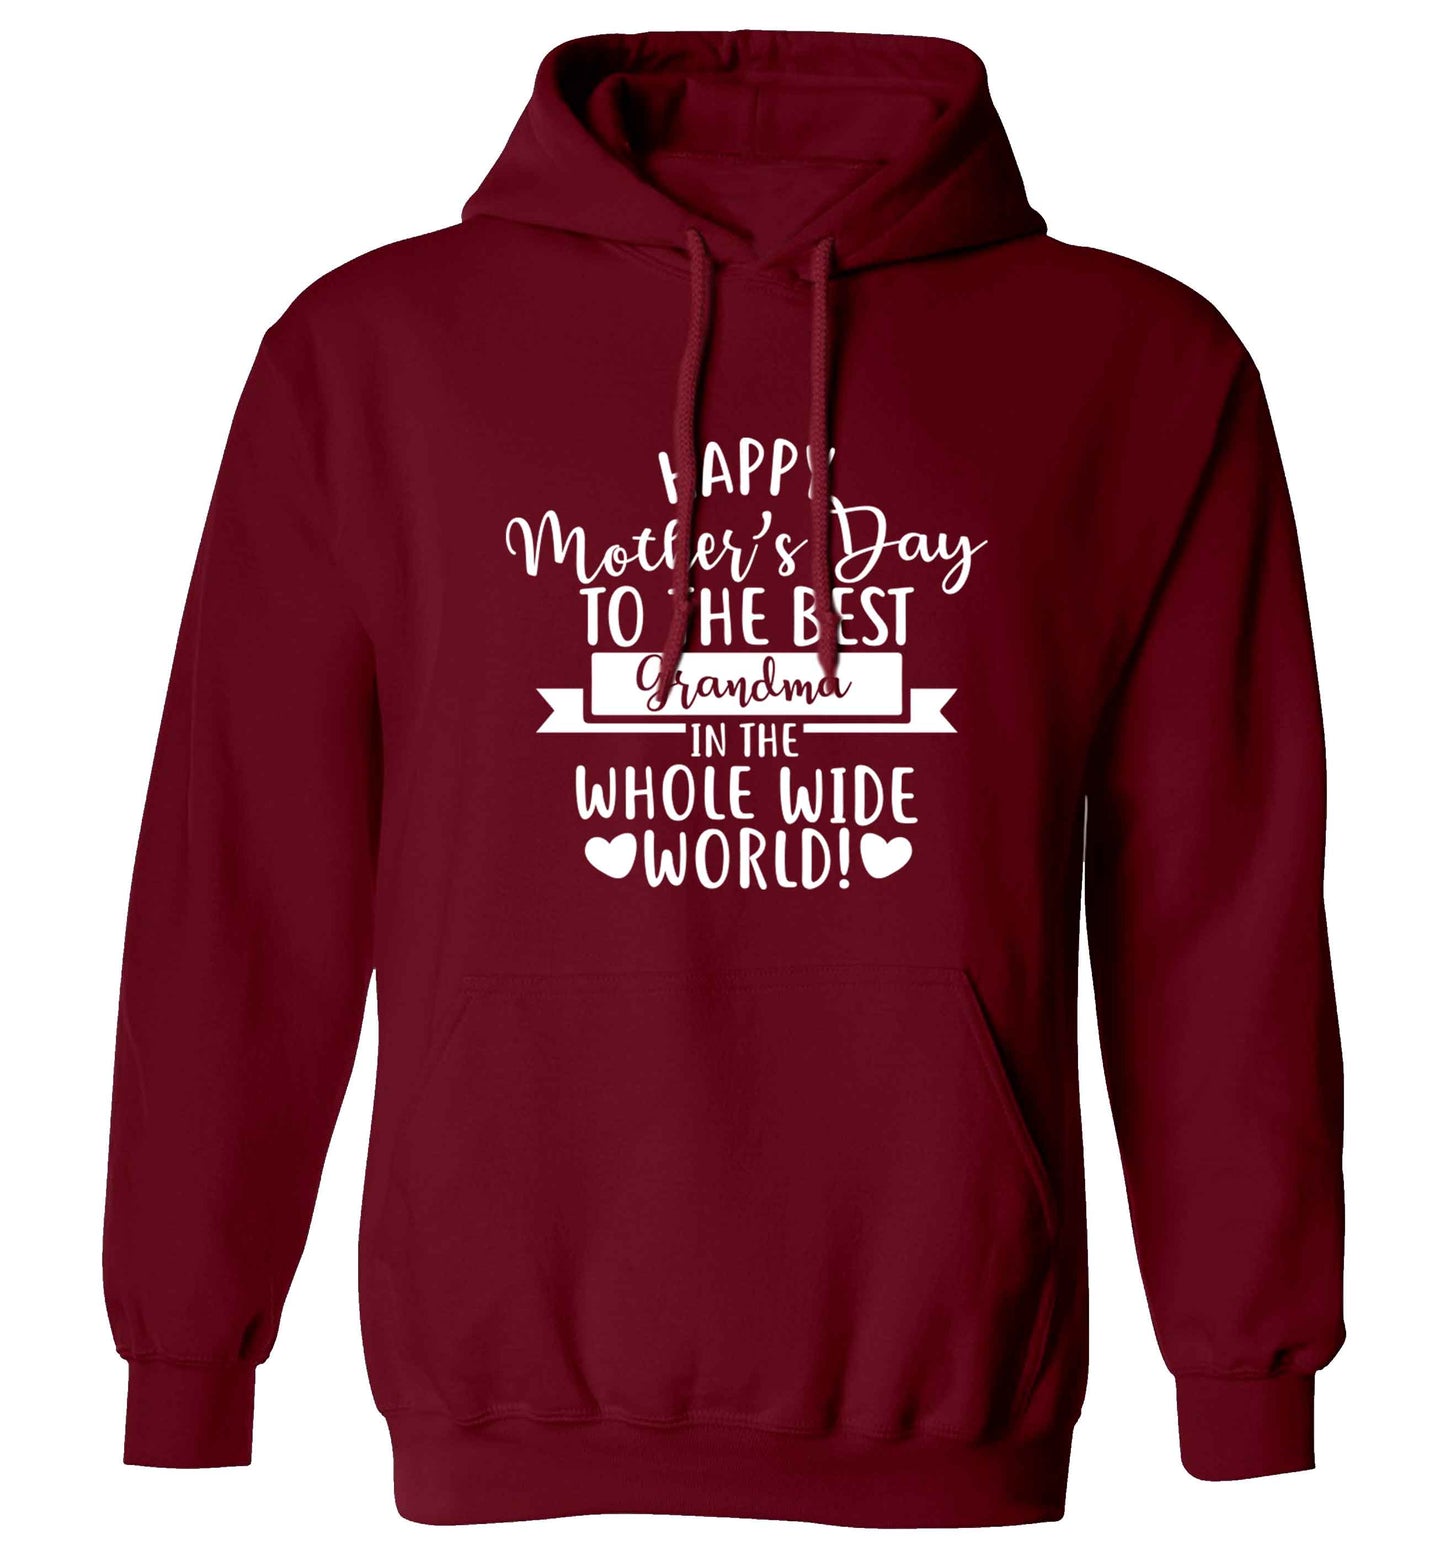 Happy mother's day to the best grandma in the world adults unisex maroon hoodie 2XL